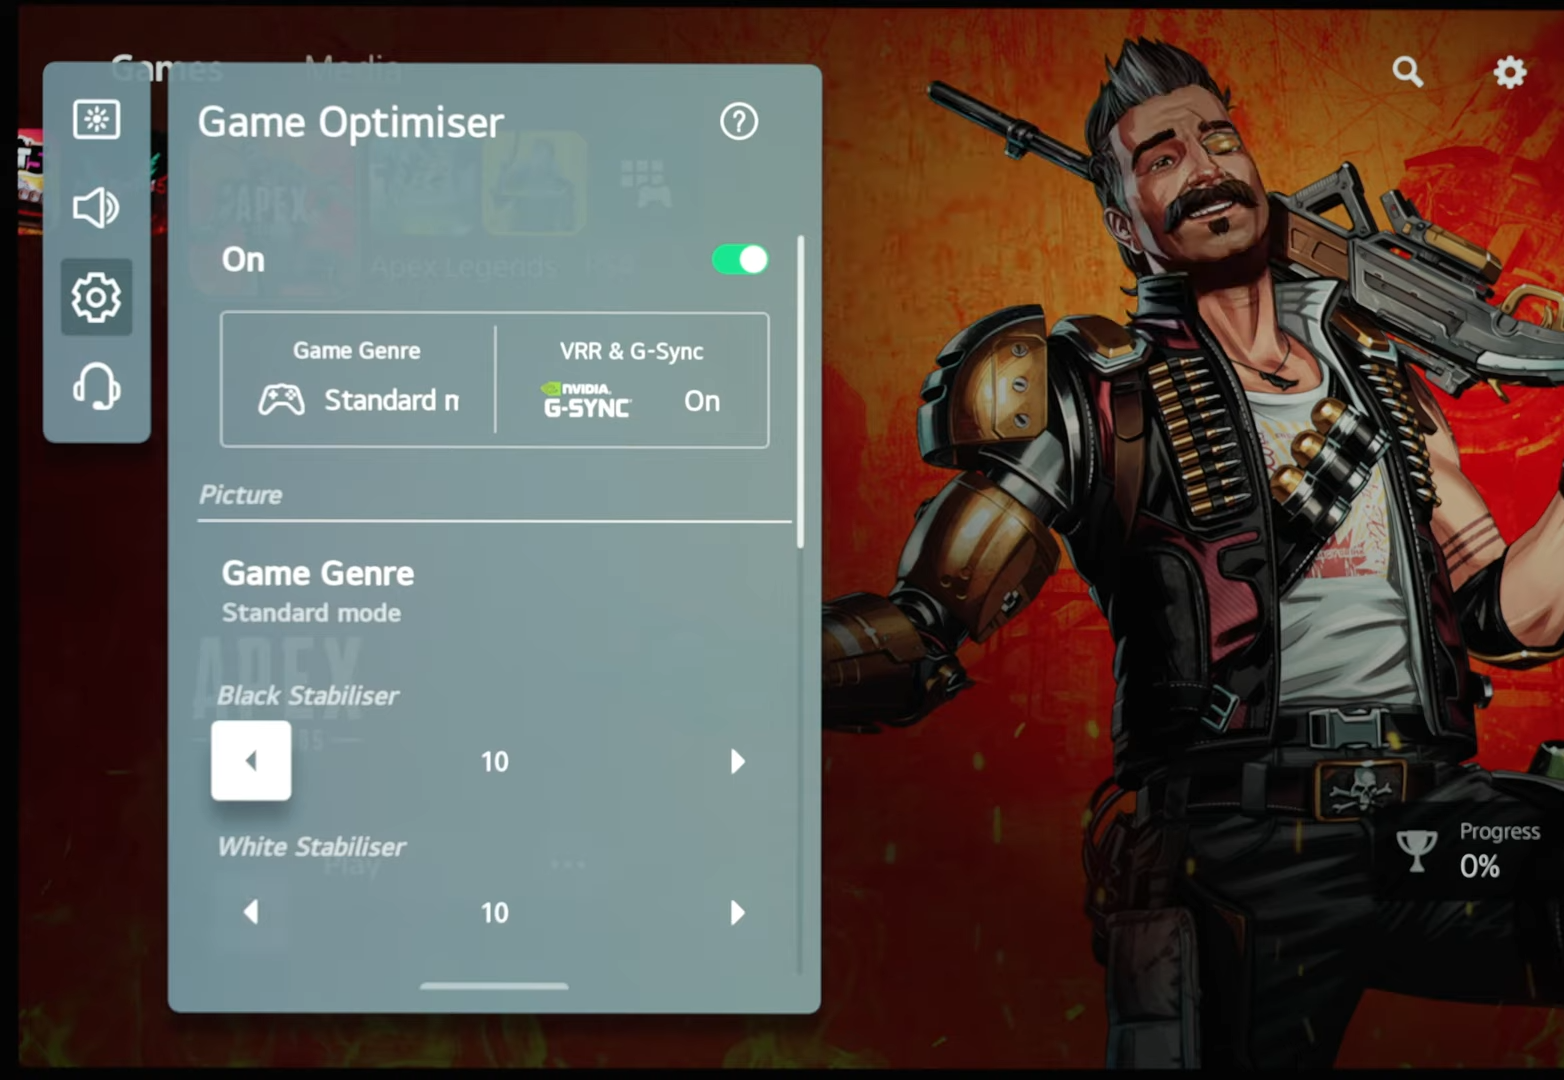 LG C1 / G1 Latest Update for Game Optimizer Dashboard! 